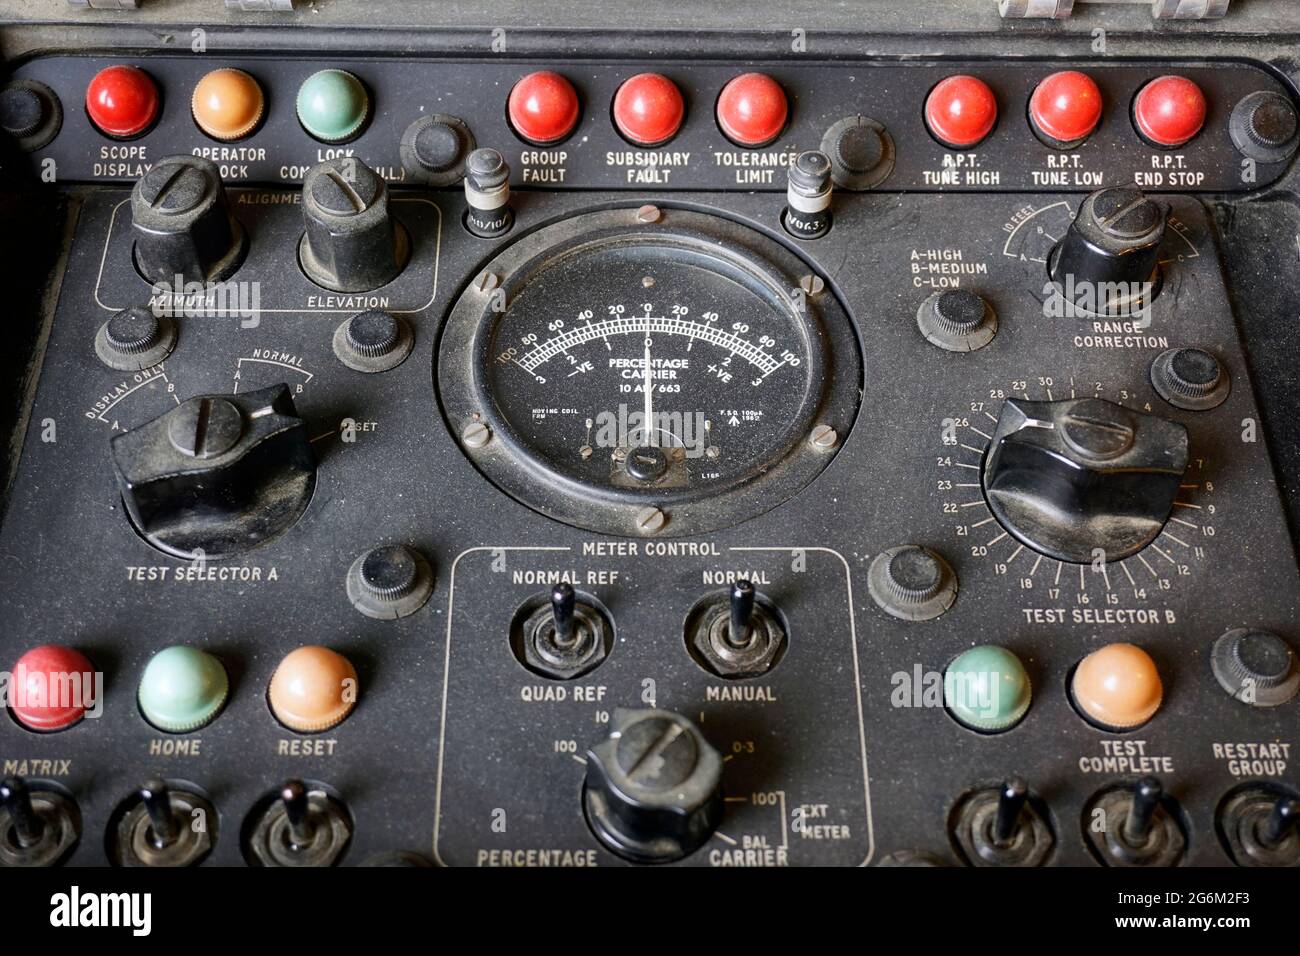 vintage old fashioned aircraft electonic test rig Stock Photo